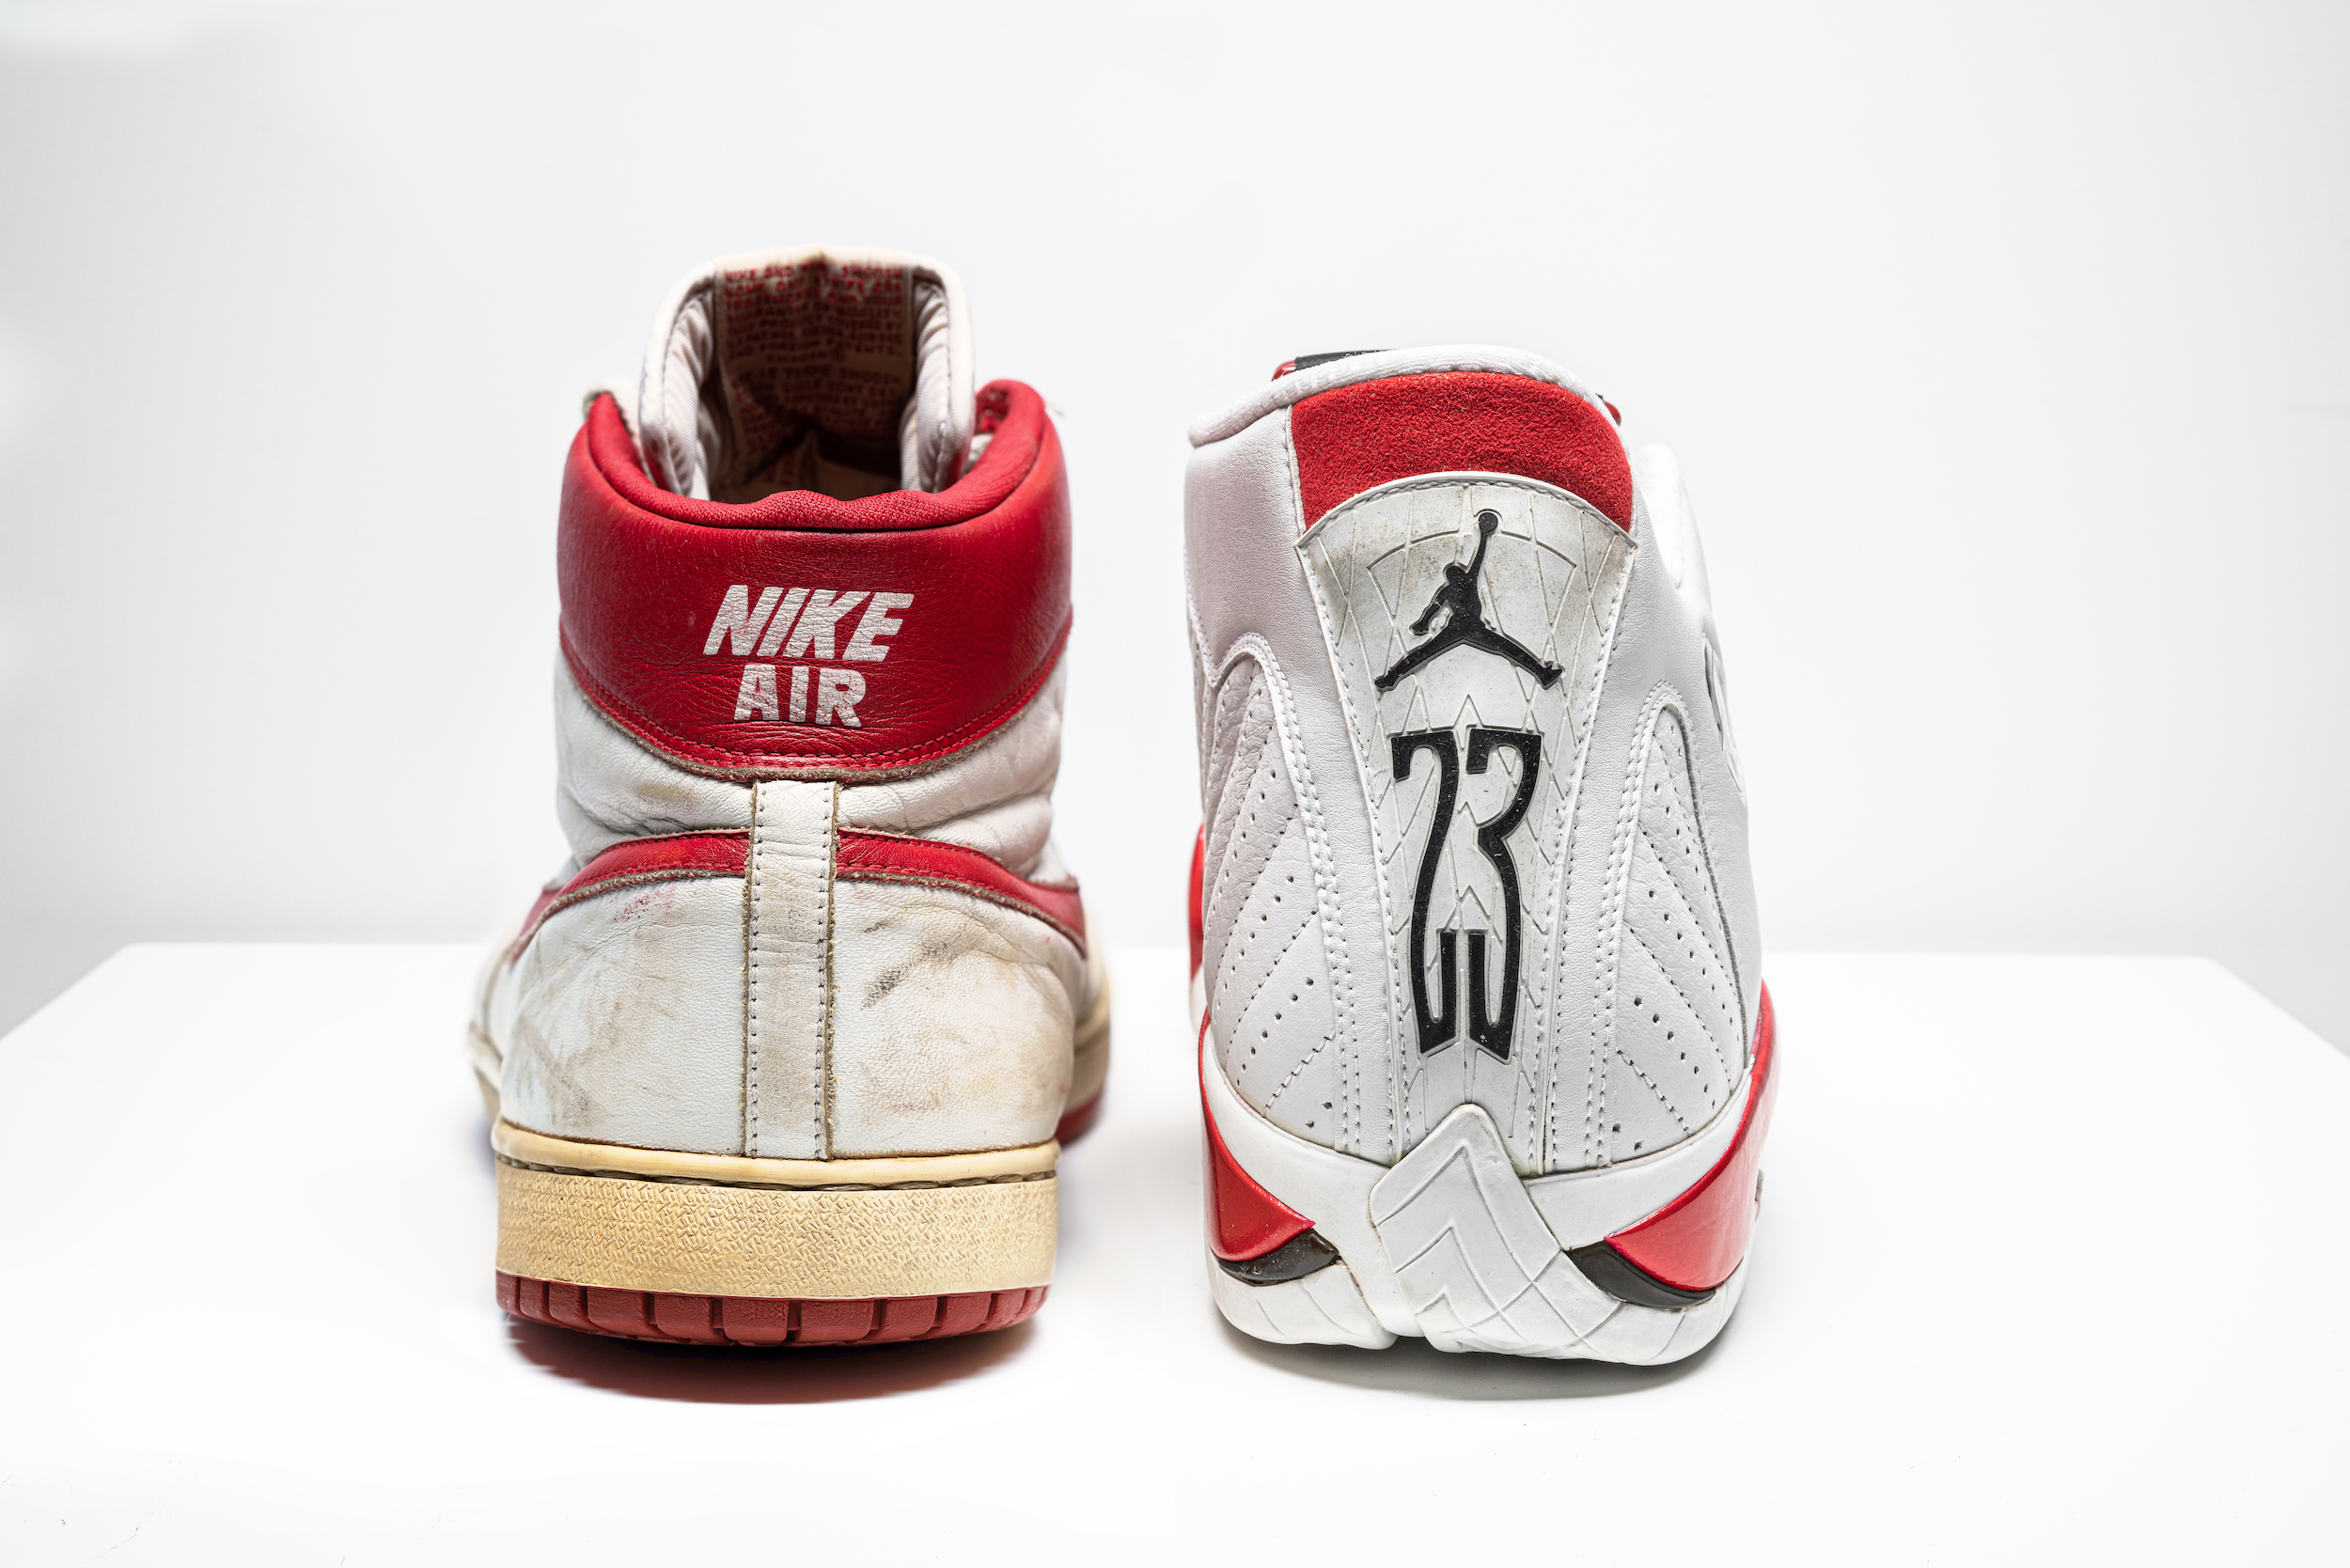 Michael Jordan's game-worn sneakers sell for a record $615,000